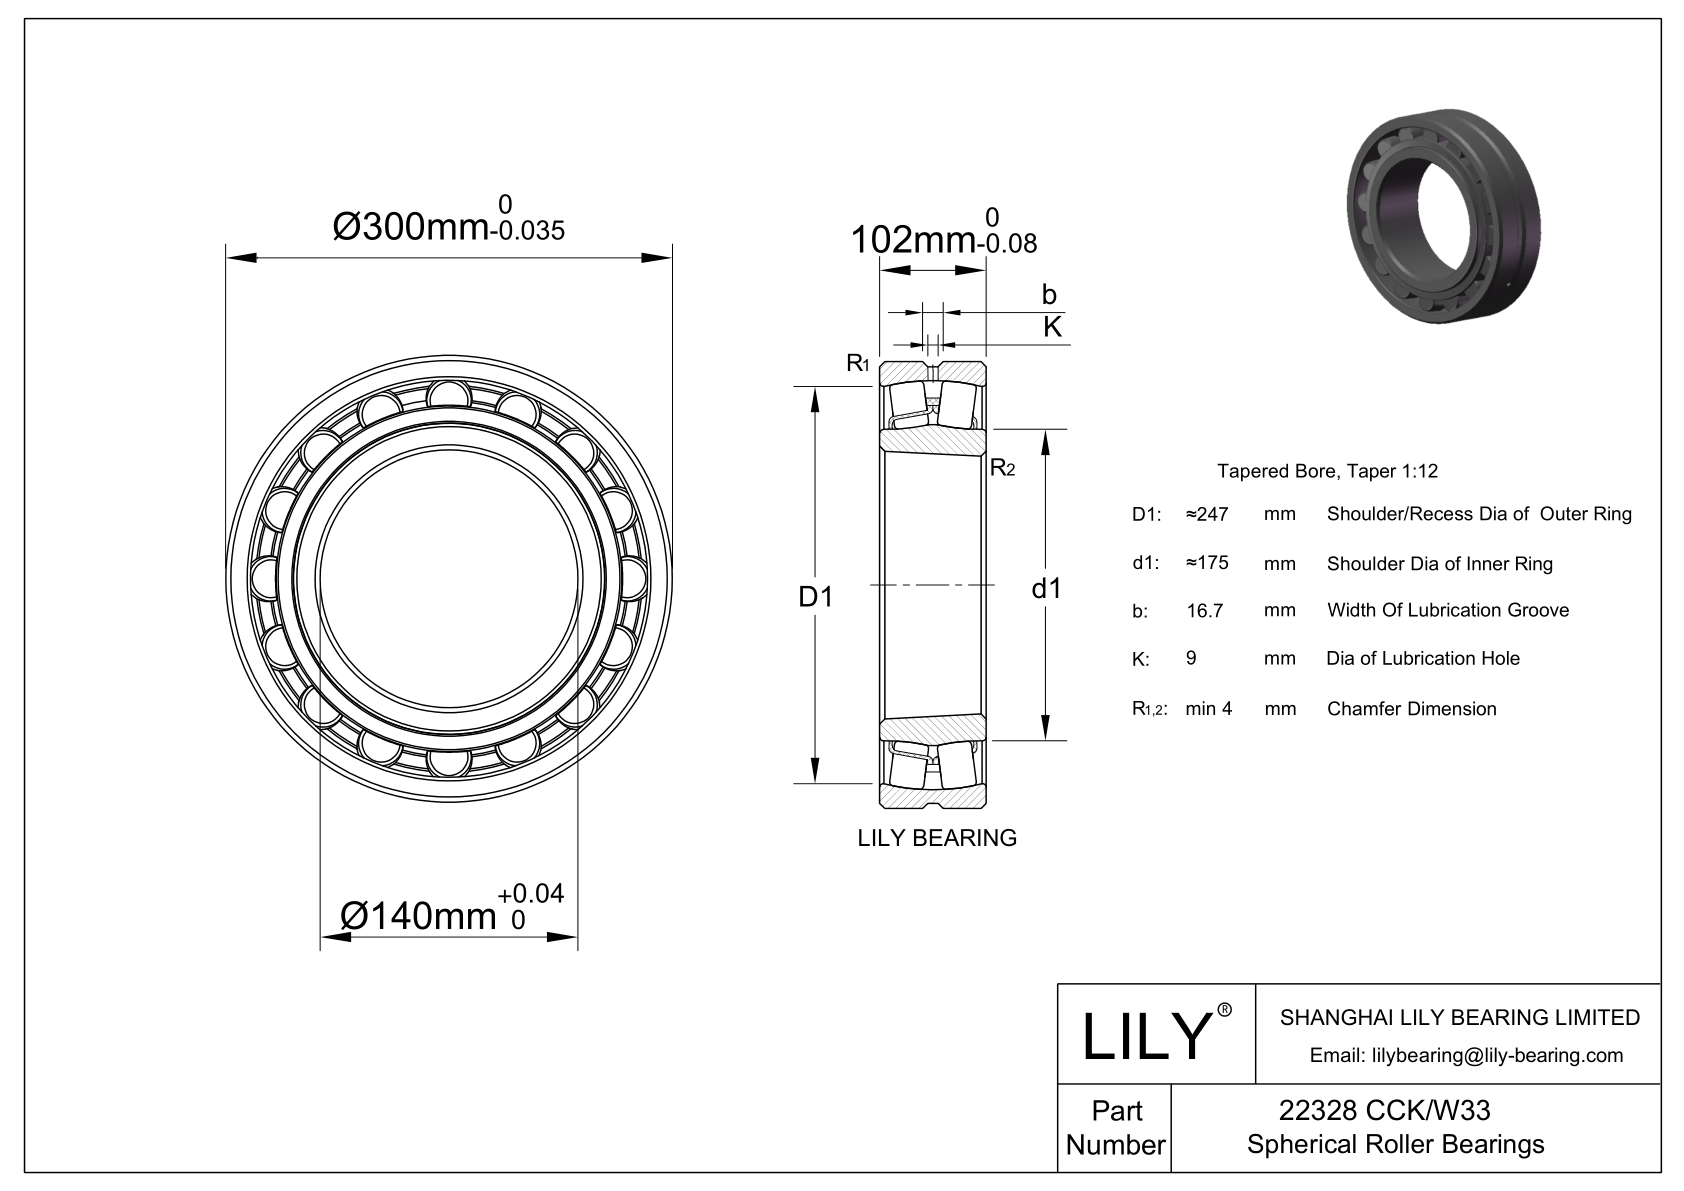 22328 CCK/W33 Double Row Spherical Roller Bearing cad drawing